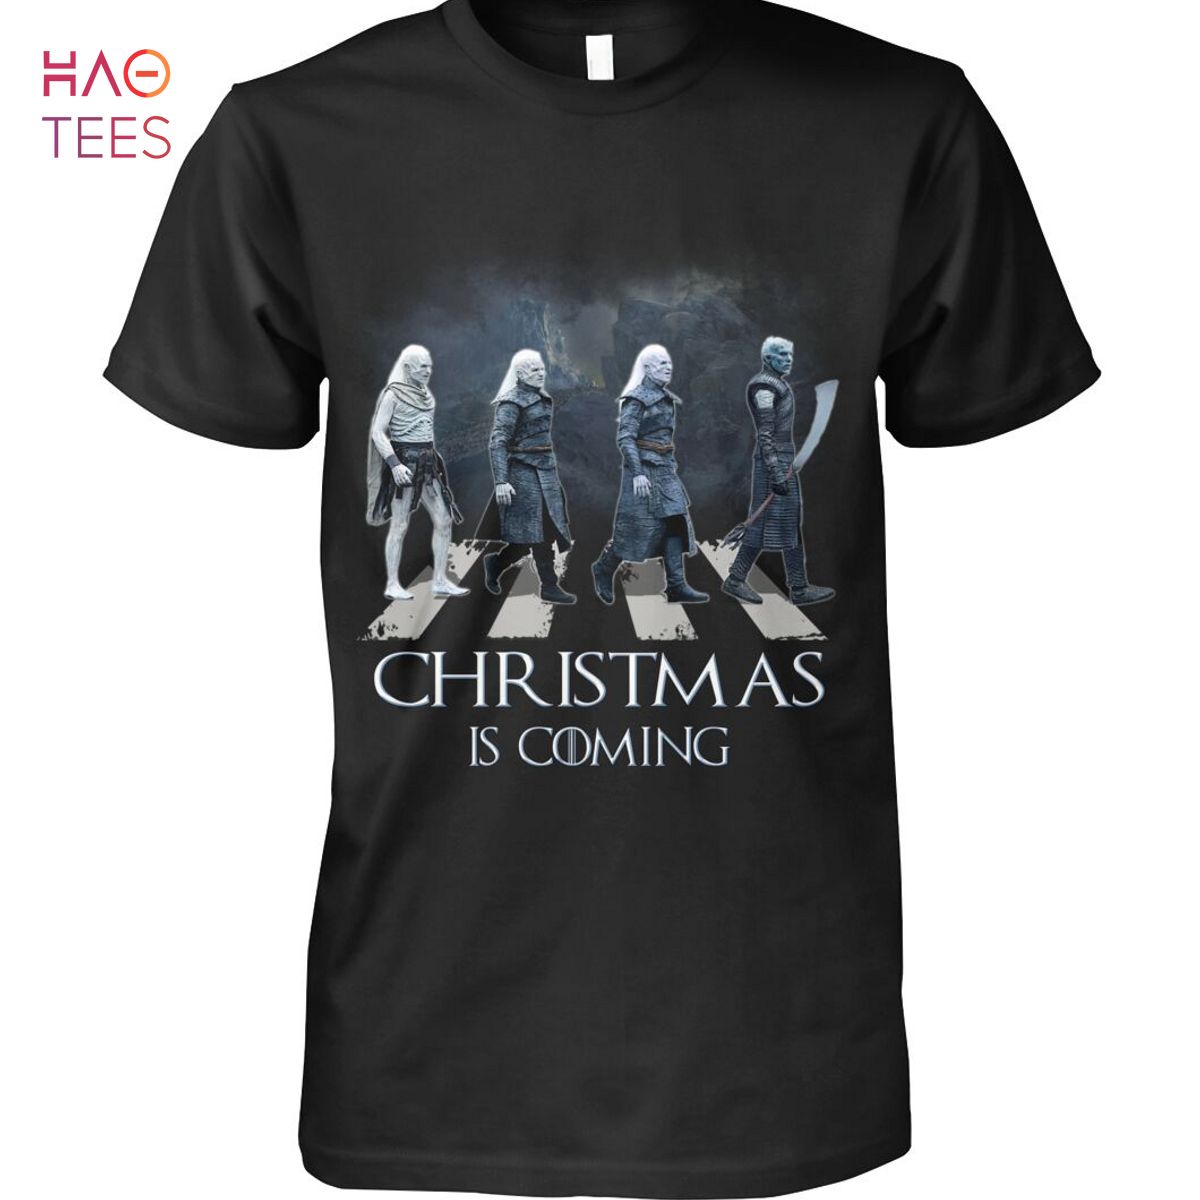 THE BEST Christmas Is Coming Shirt